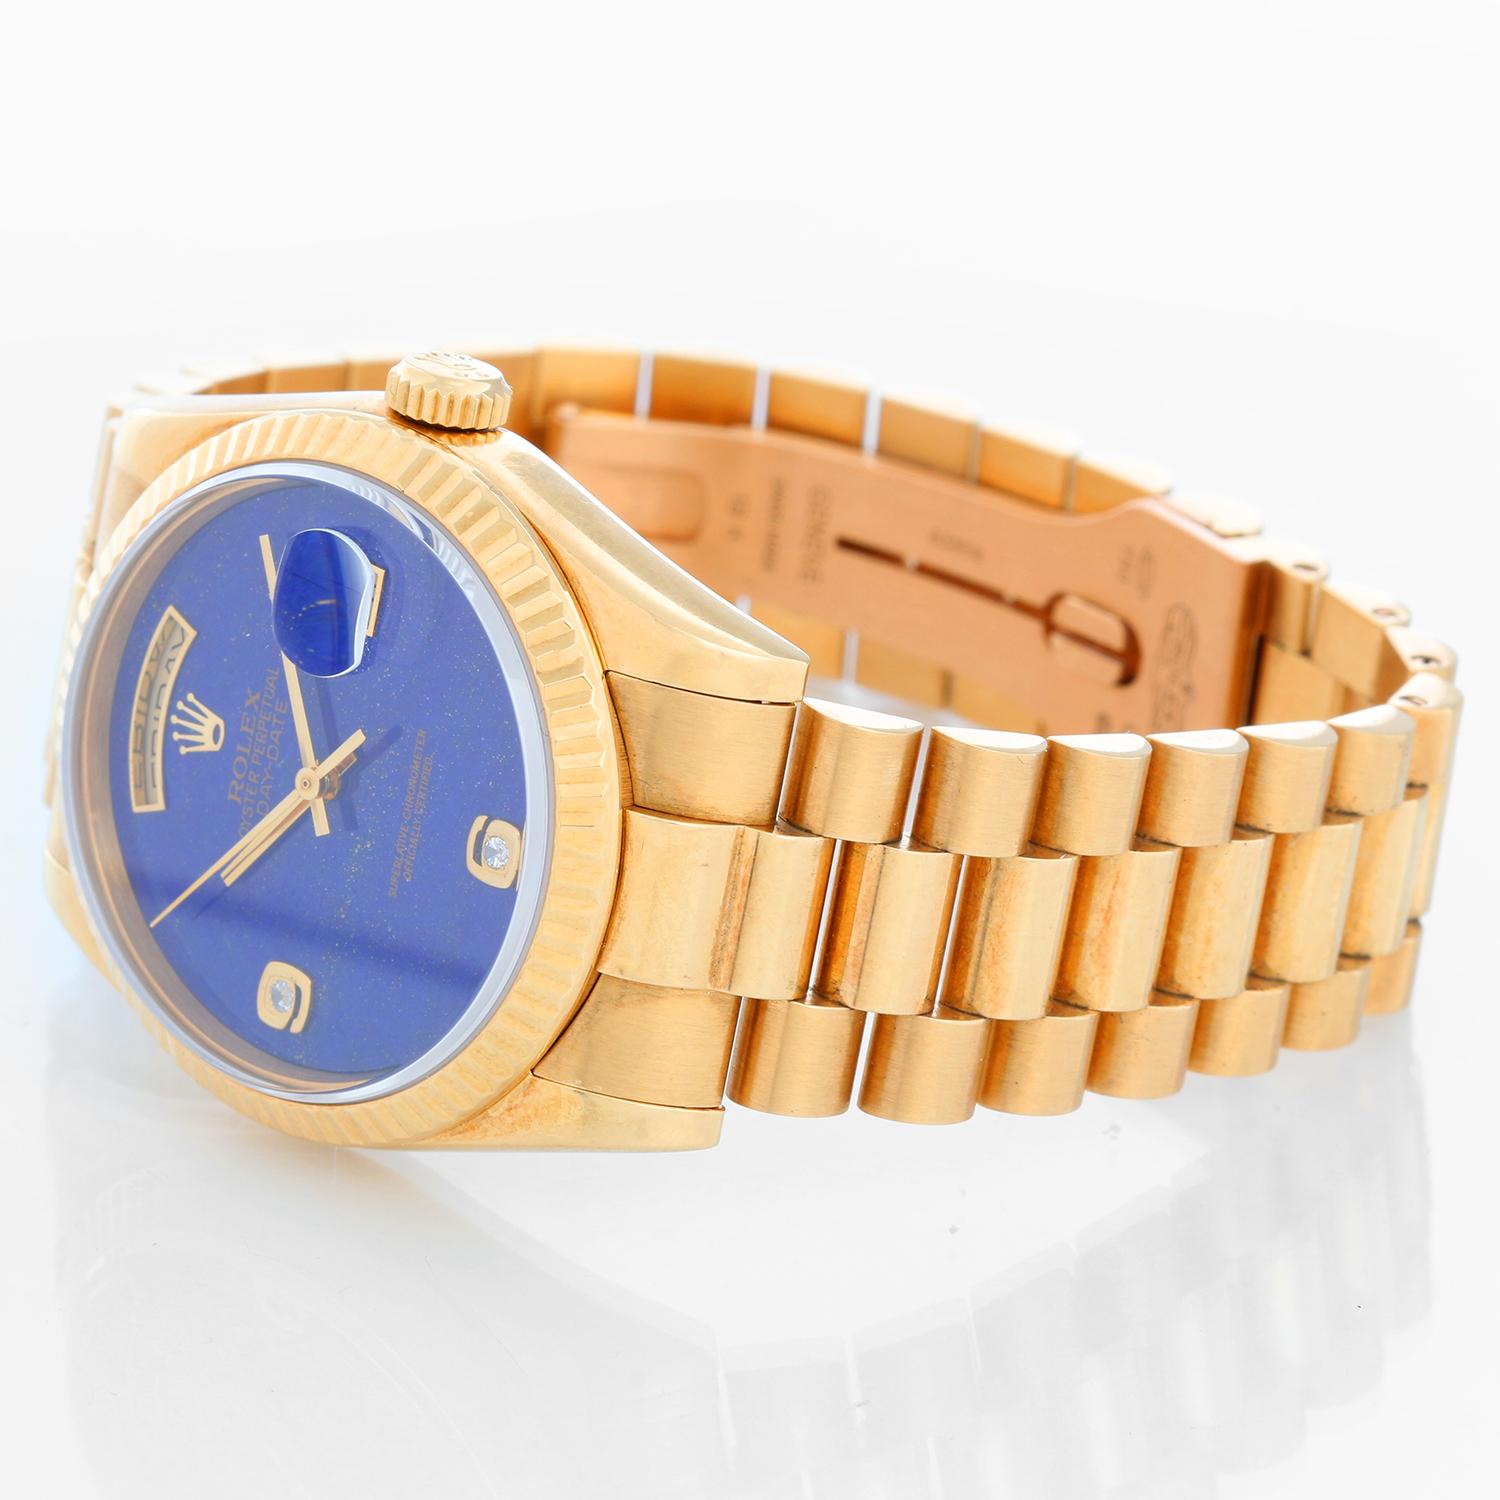 Rolex President Day-Date Men's Watch 118238 - Automatic winding, 31 jewels, Quickset, sapphire crystal. 18k yellow gold case with fluted bezel (36mm diameter). Genuine Rolex Lapis dial with diamonds at 6 & 9 o clock. 18k yellow gold hidden-clasp